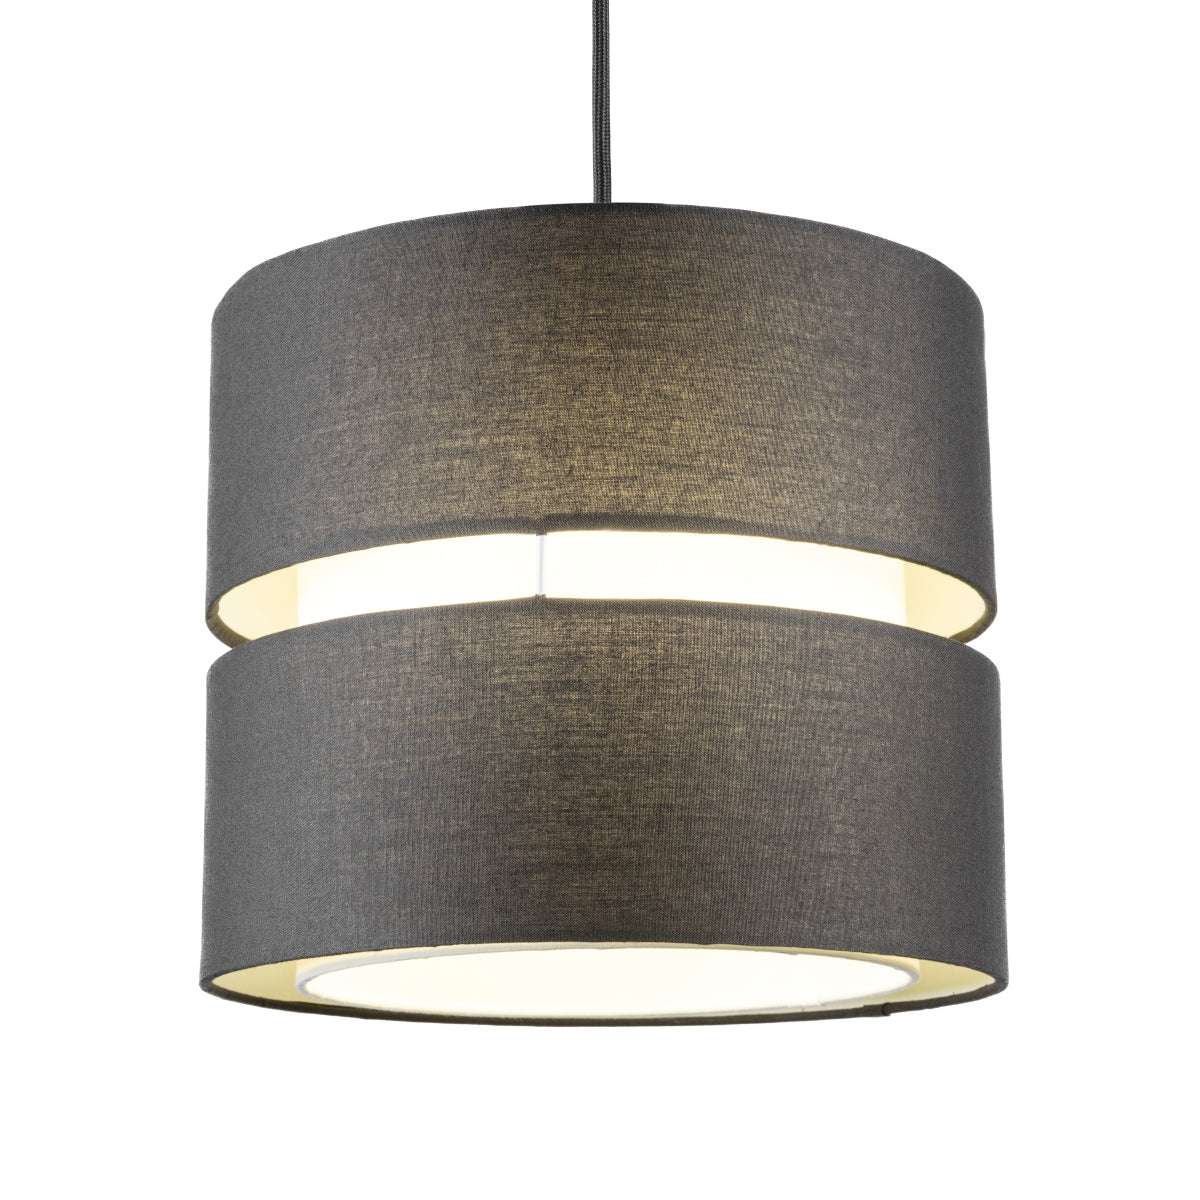 Our Gayle easy fit two tiered luxury fabric double layered shade is contemporary in its appearance and we have designed the shade to suit a range of interiors. Easy to fit simply attached to an existing pendant flitting.  It is crafted from high quality fabric material in two layers and complimented with a white inner which looks beautiful when light shines through